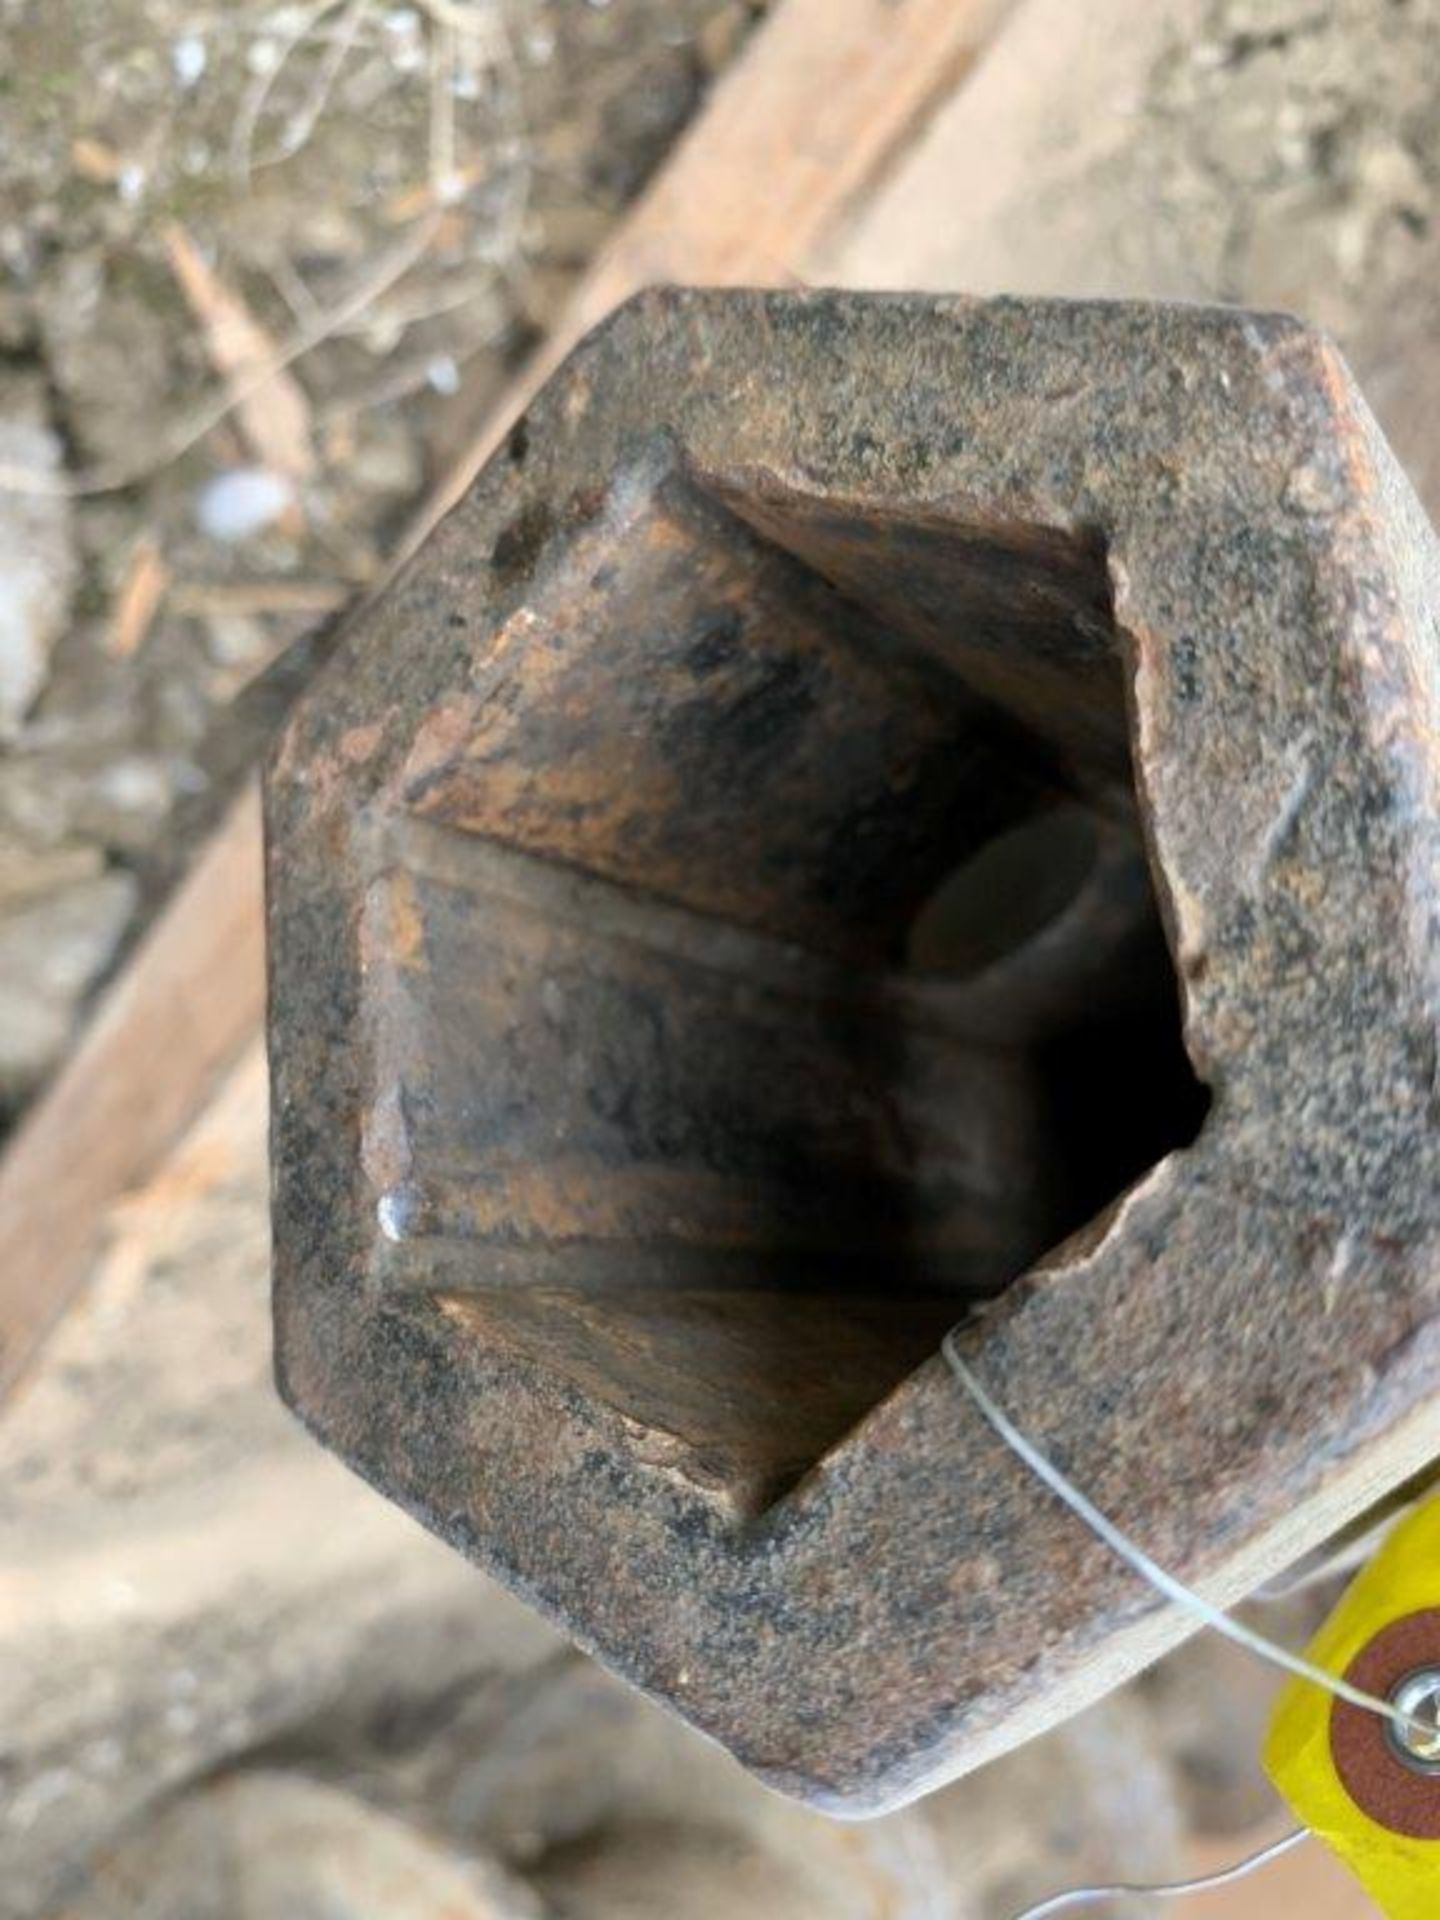 10 INCH DIRT AUGER BIT W/ 2 INCH HEX CONNECTOR - Image 3 of 3